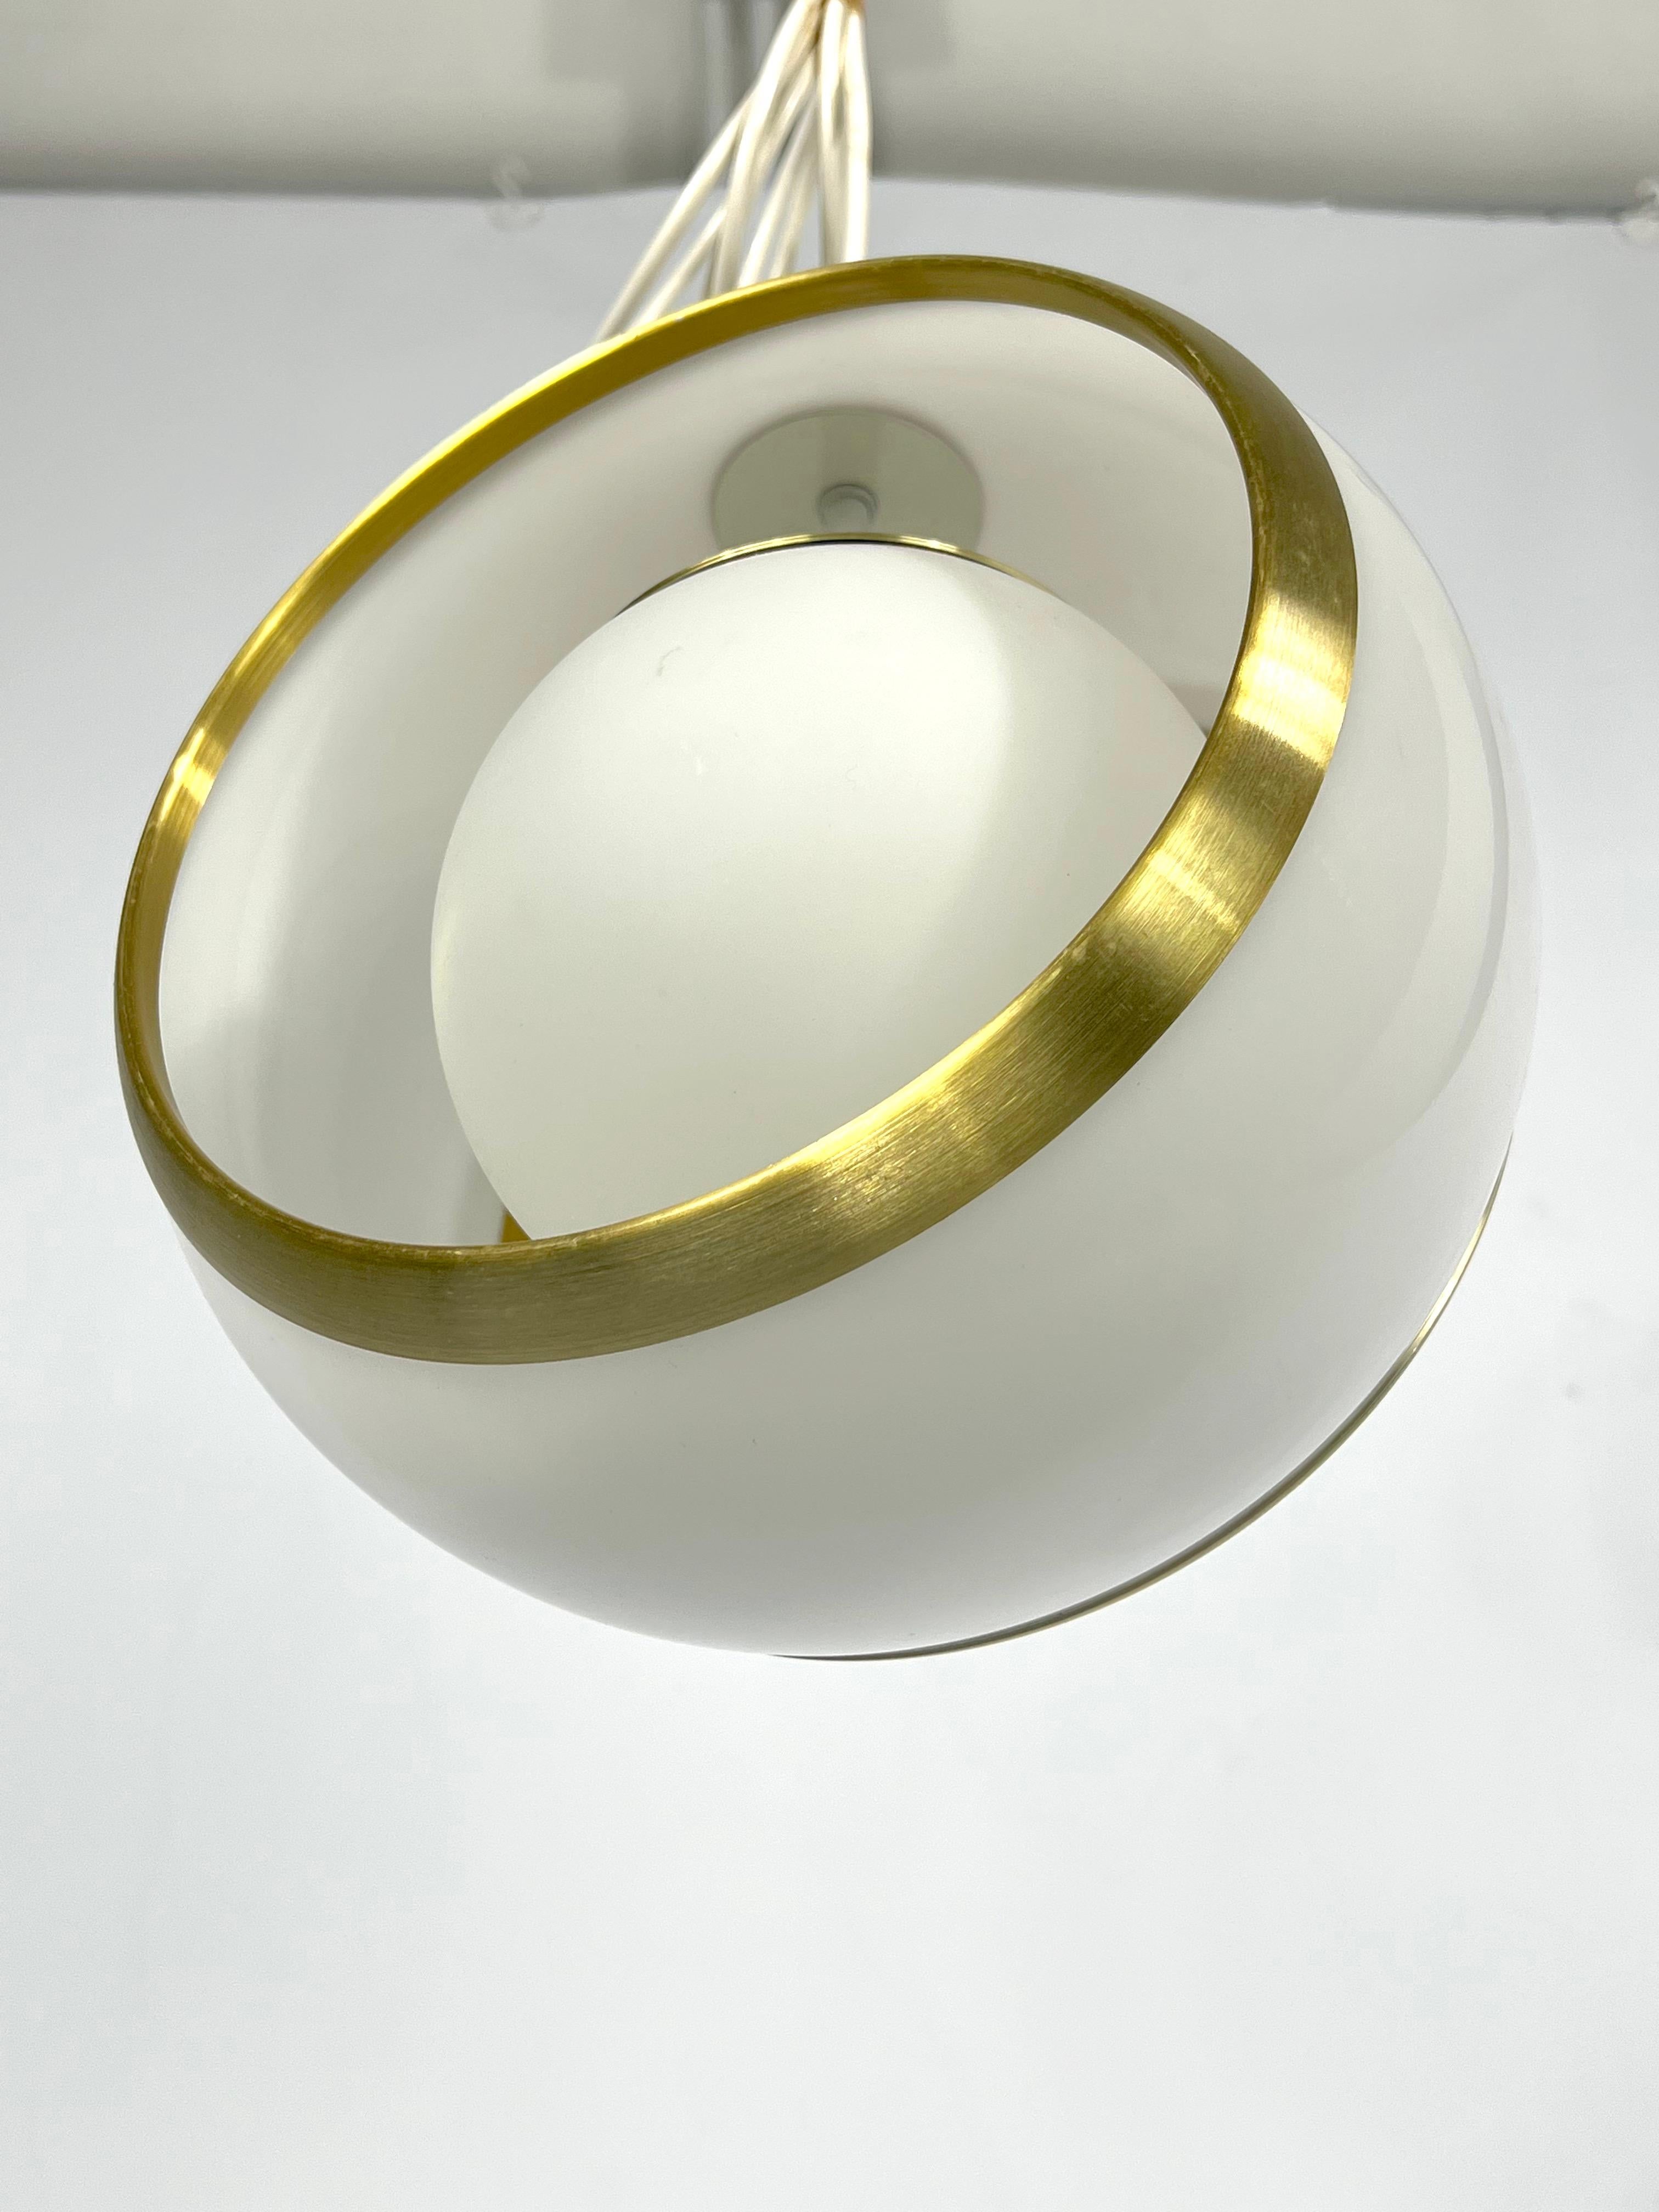 Stilux Milano, Gilded Aluminum, Opaline and Perspex Pendant, Italy, 1960s For Sale 4